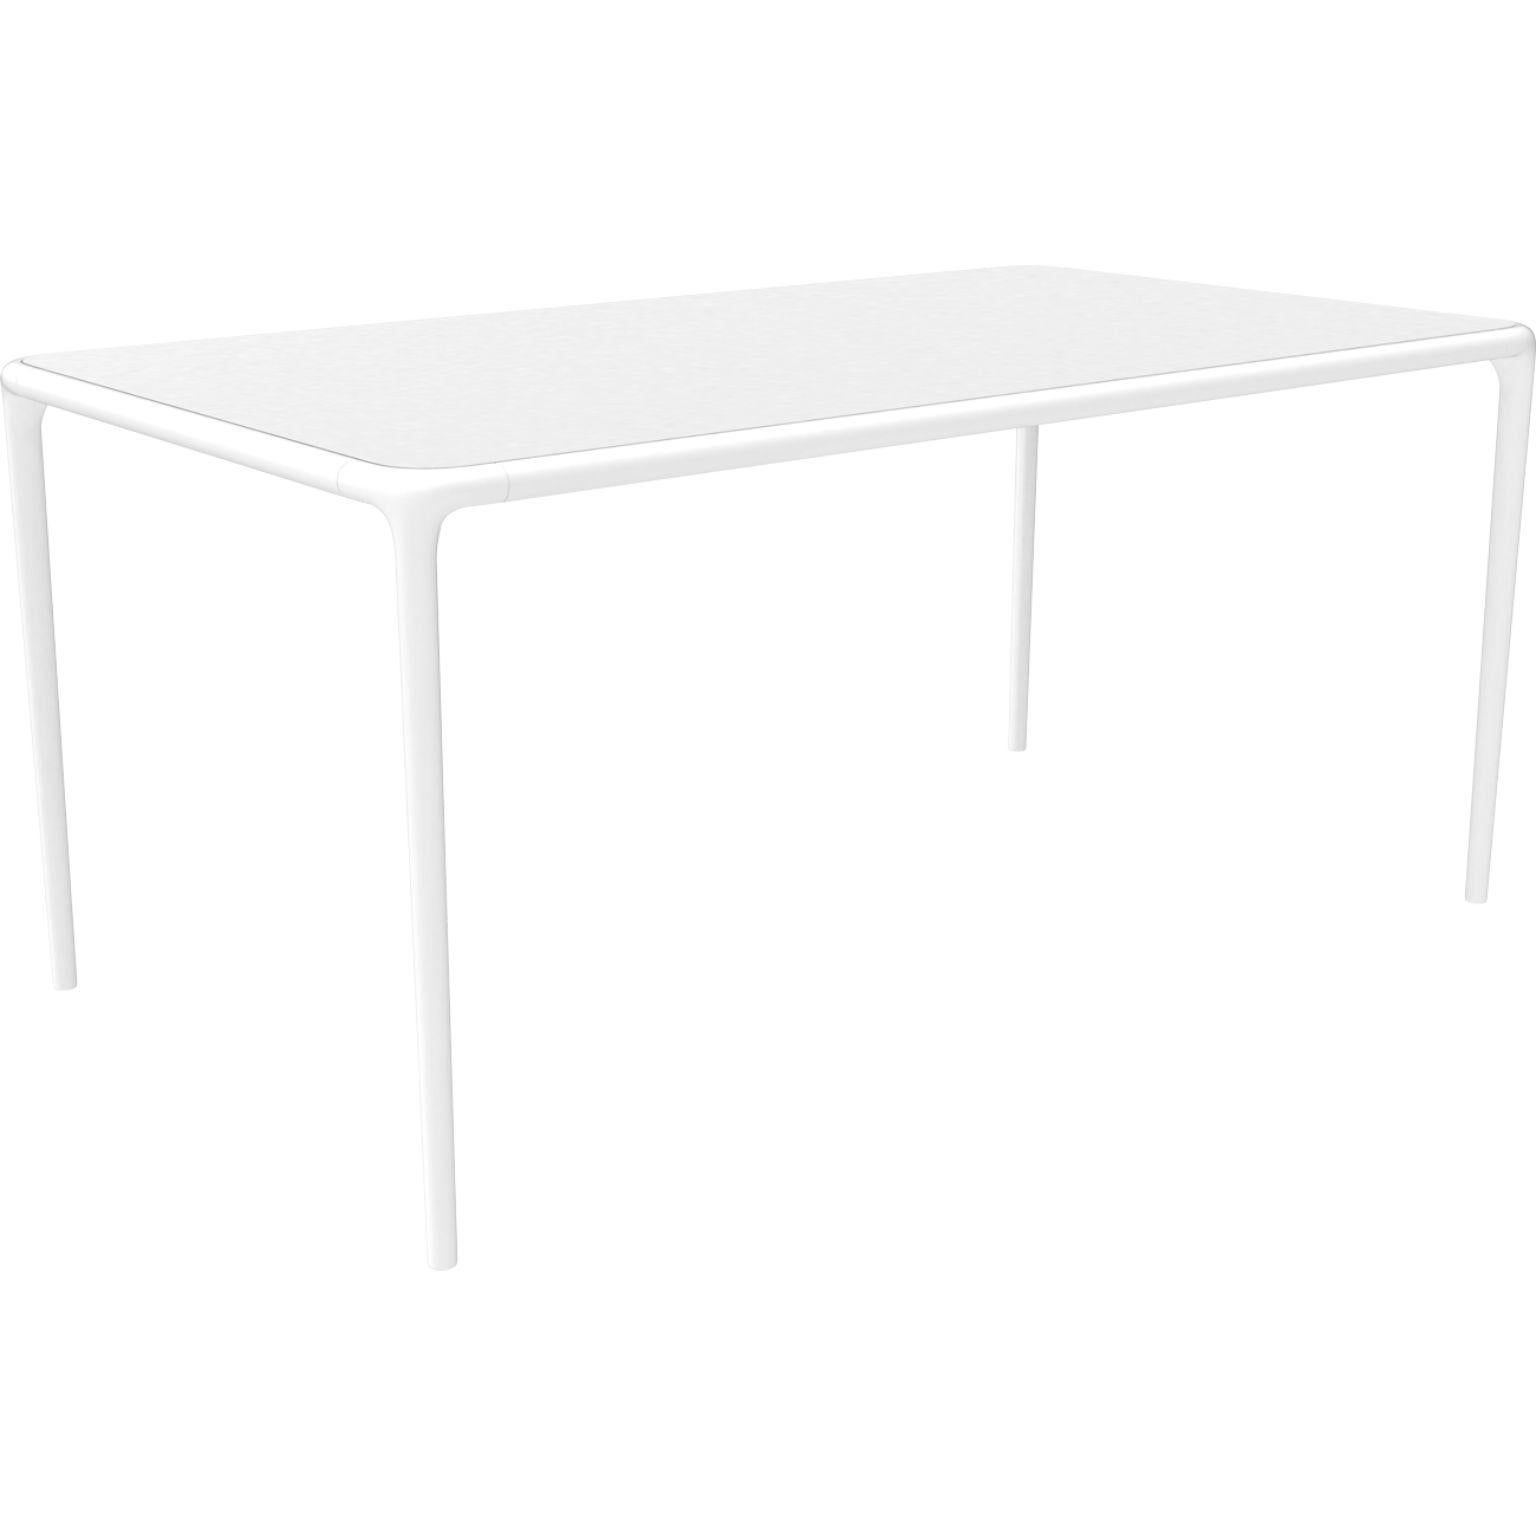 Xaloc white glass top table 160 by MOWEE
Dimensions: D160 x W90 x H74 cm
Material: Aluminum, tinted tempered glass top.
Also available in different aluminum colors and finishes (HPL Black Edge or Neolith). 

Xaloc synthesizes the lines of